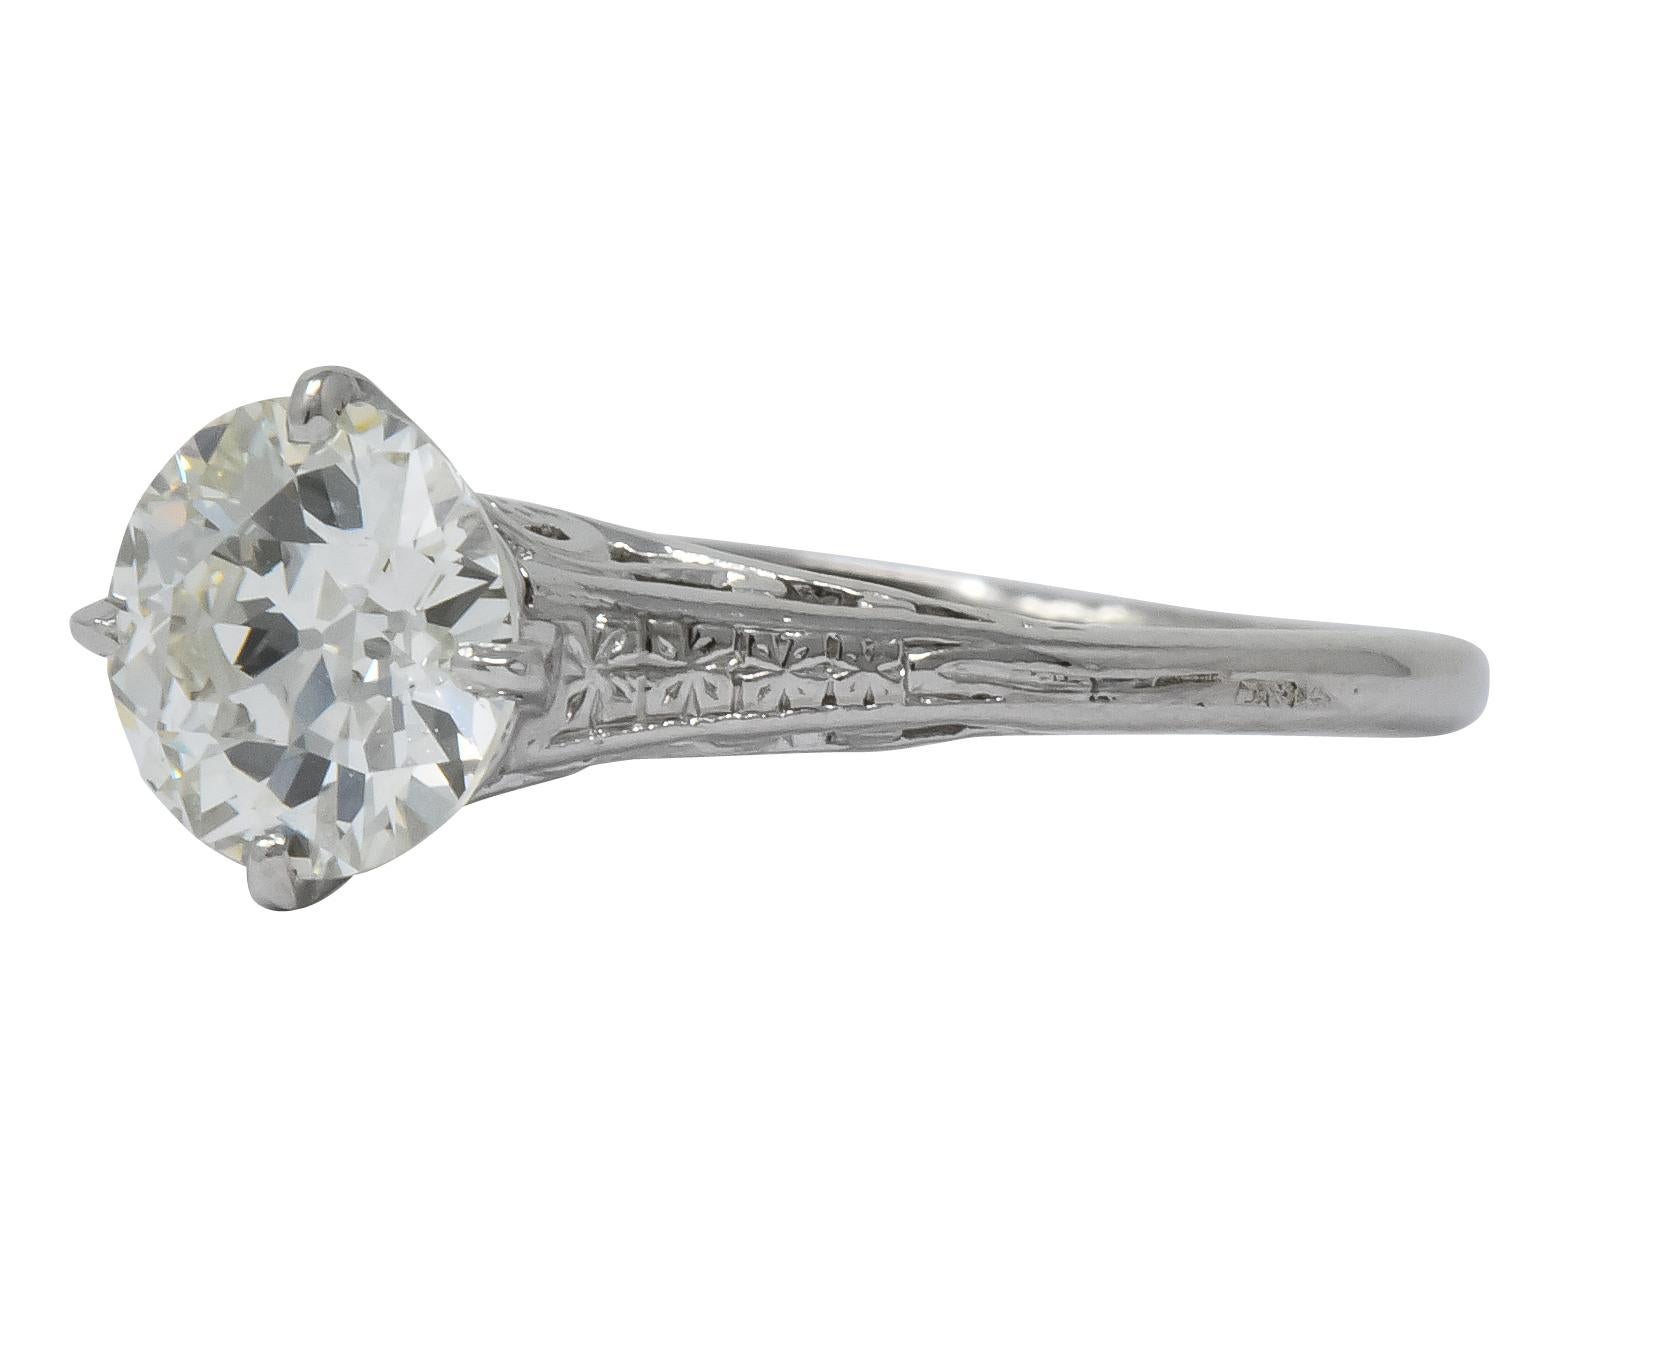 Centering an old European cut diamond weighing 1.23 carats, L color and VS1 clarity

With a delicate pierced platinum and floral engraved gallery, with a north, east south, west setting 

Tested as platinum

Ring Size: 7 & Sizable

Top measures 7.8